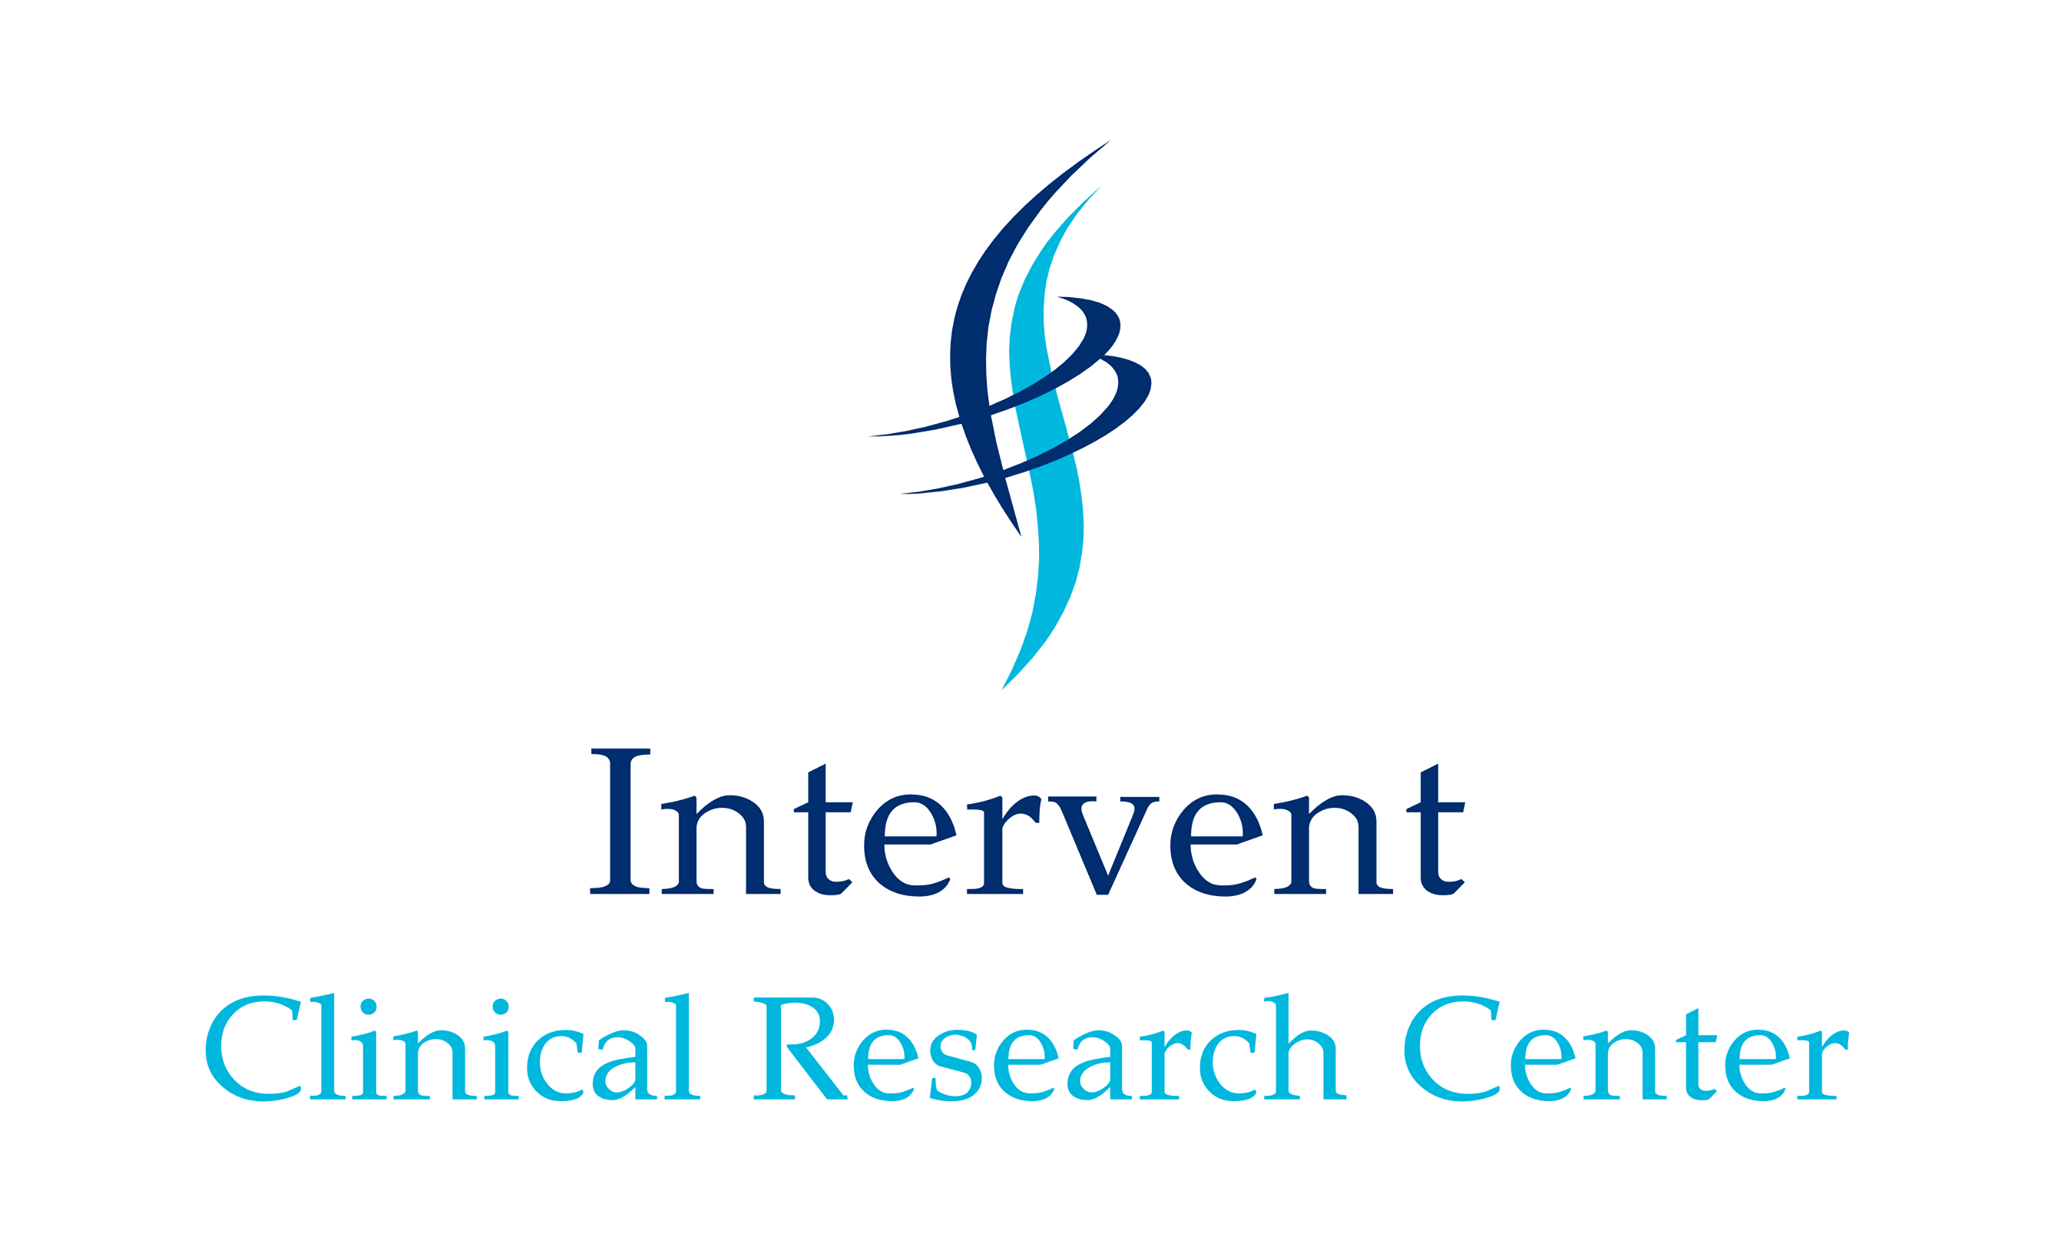 Intervent Clinical Research Center